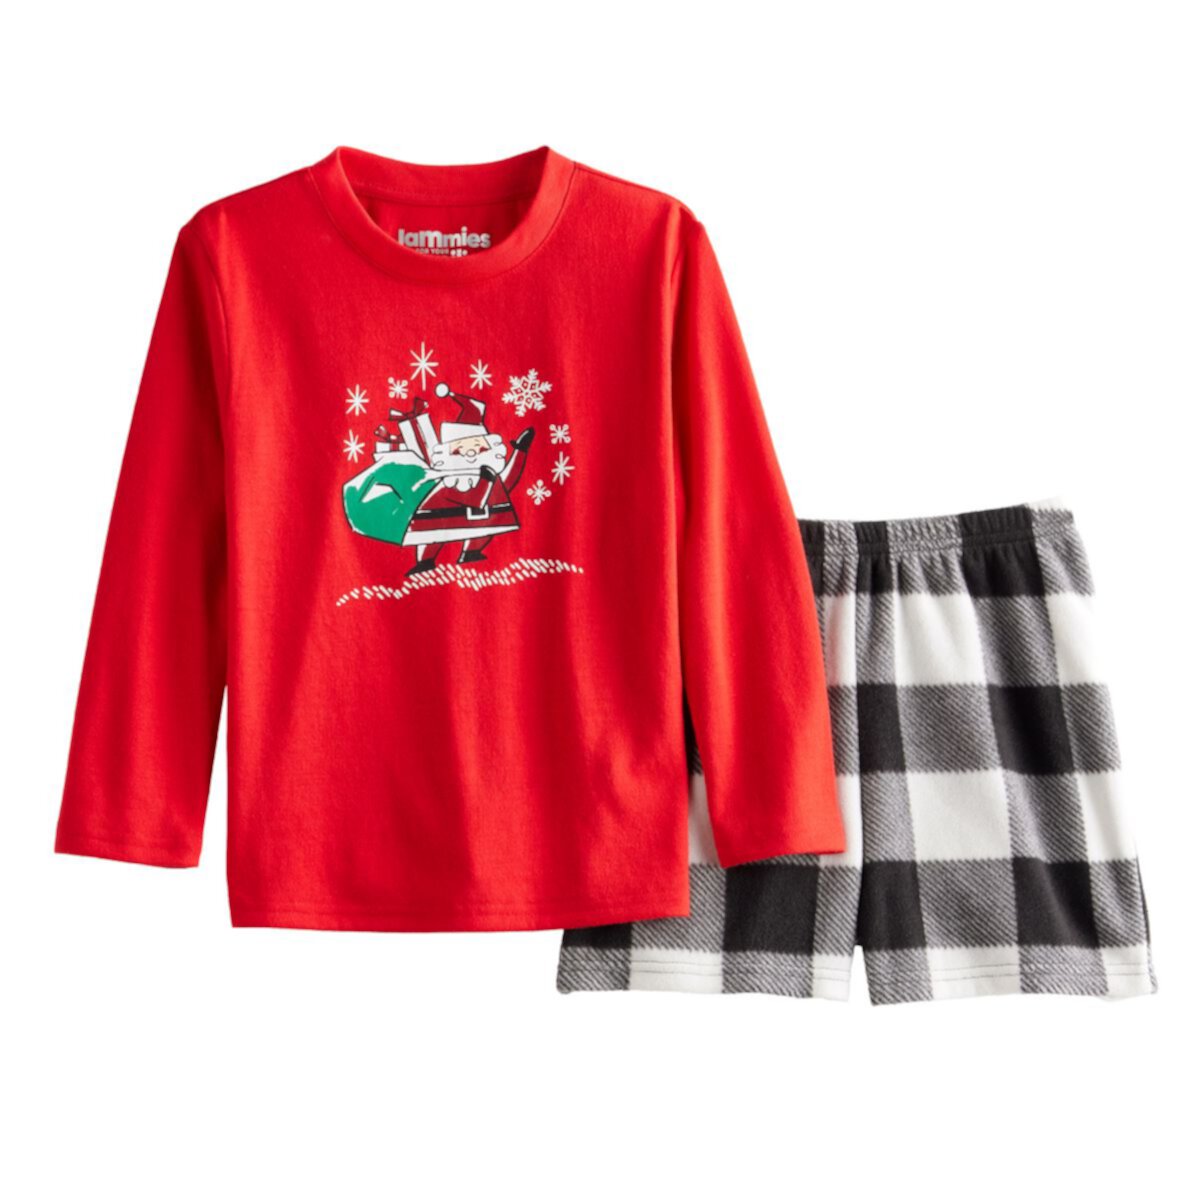 Girls 4-16 Jammies For Your Families® Doodle Santa Girls Top & Bottom Set Jammies For Your Families